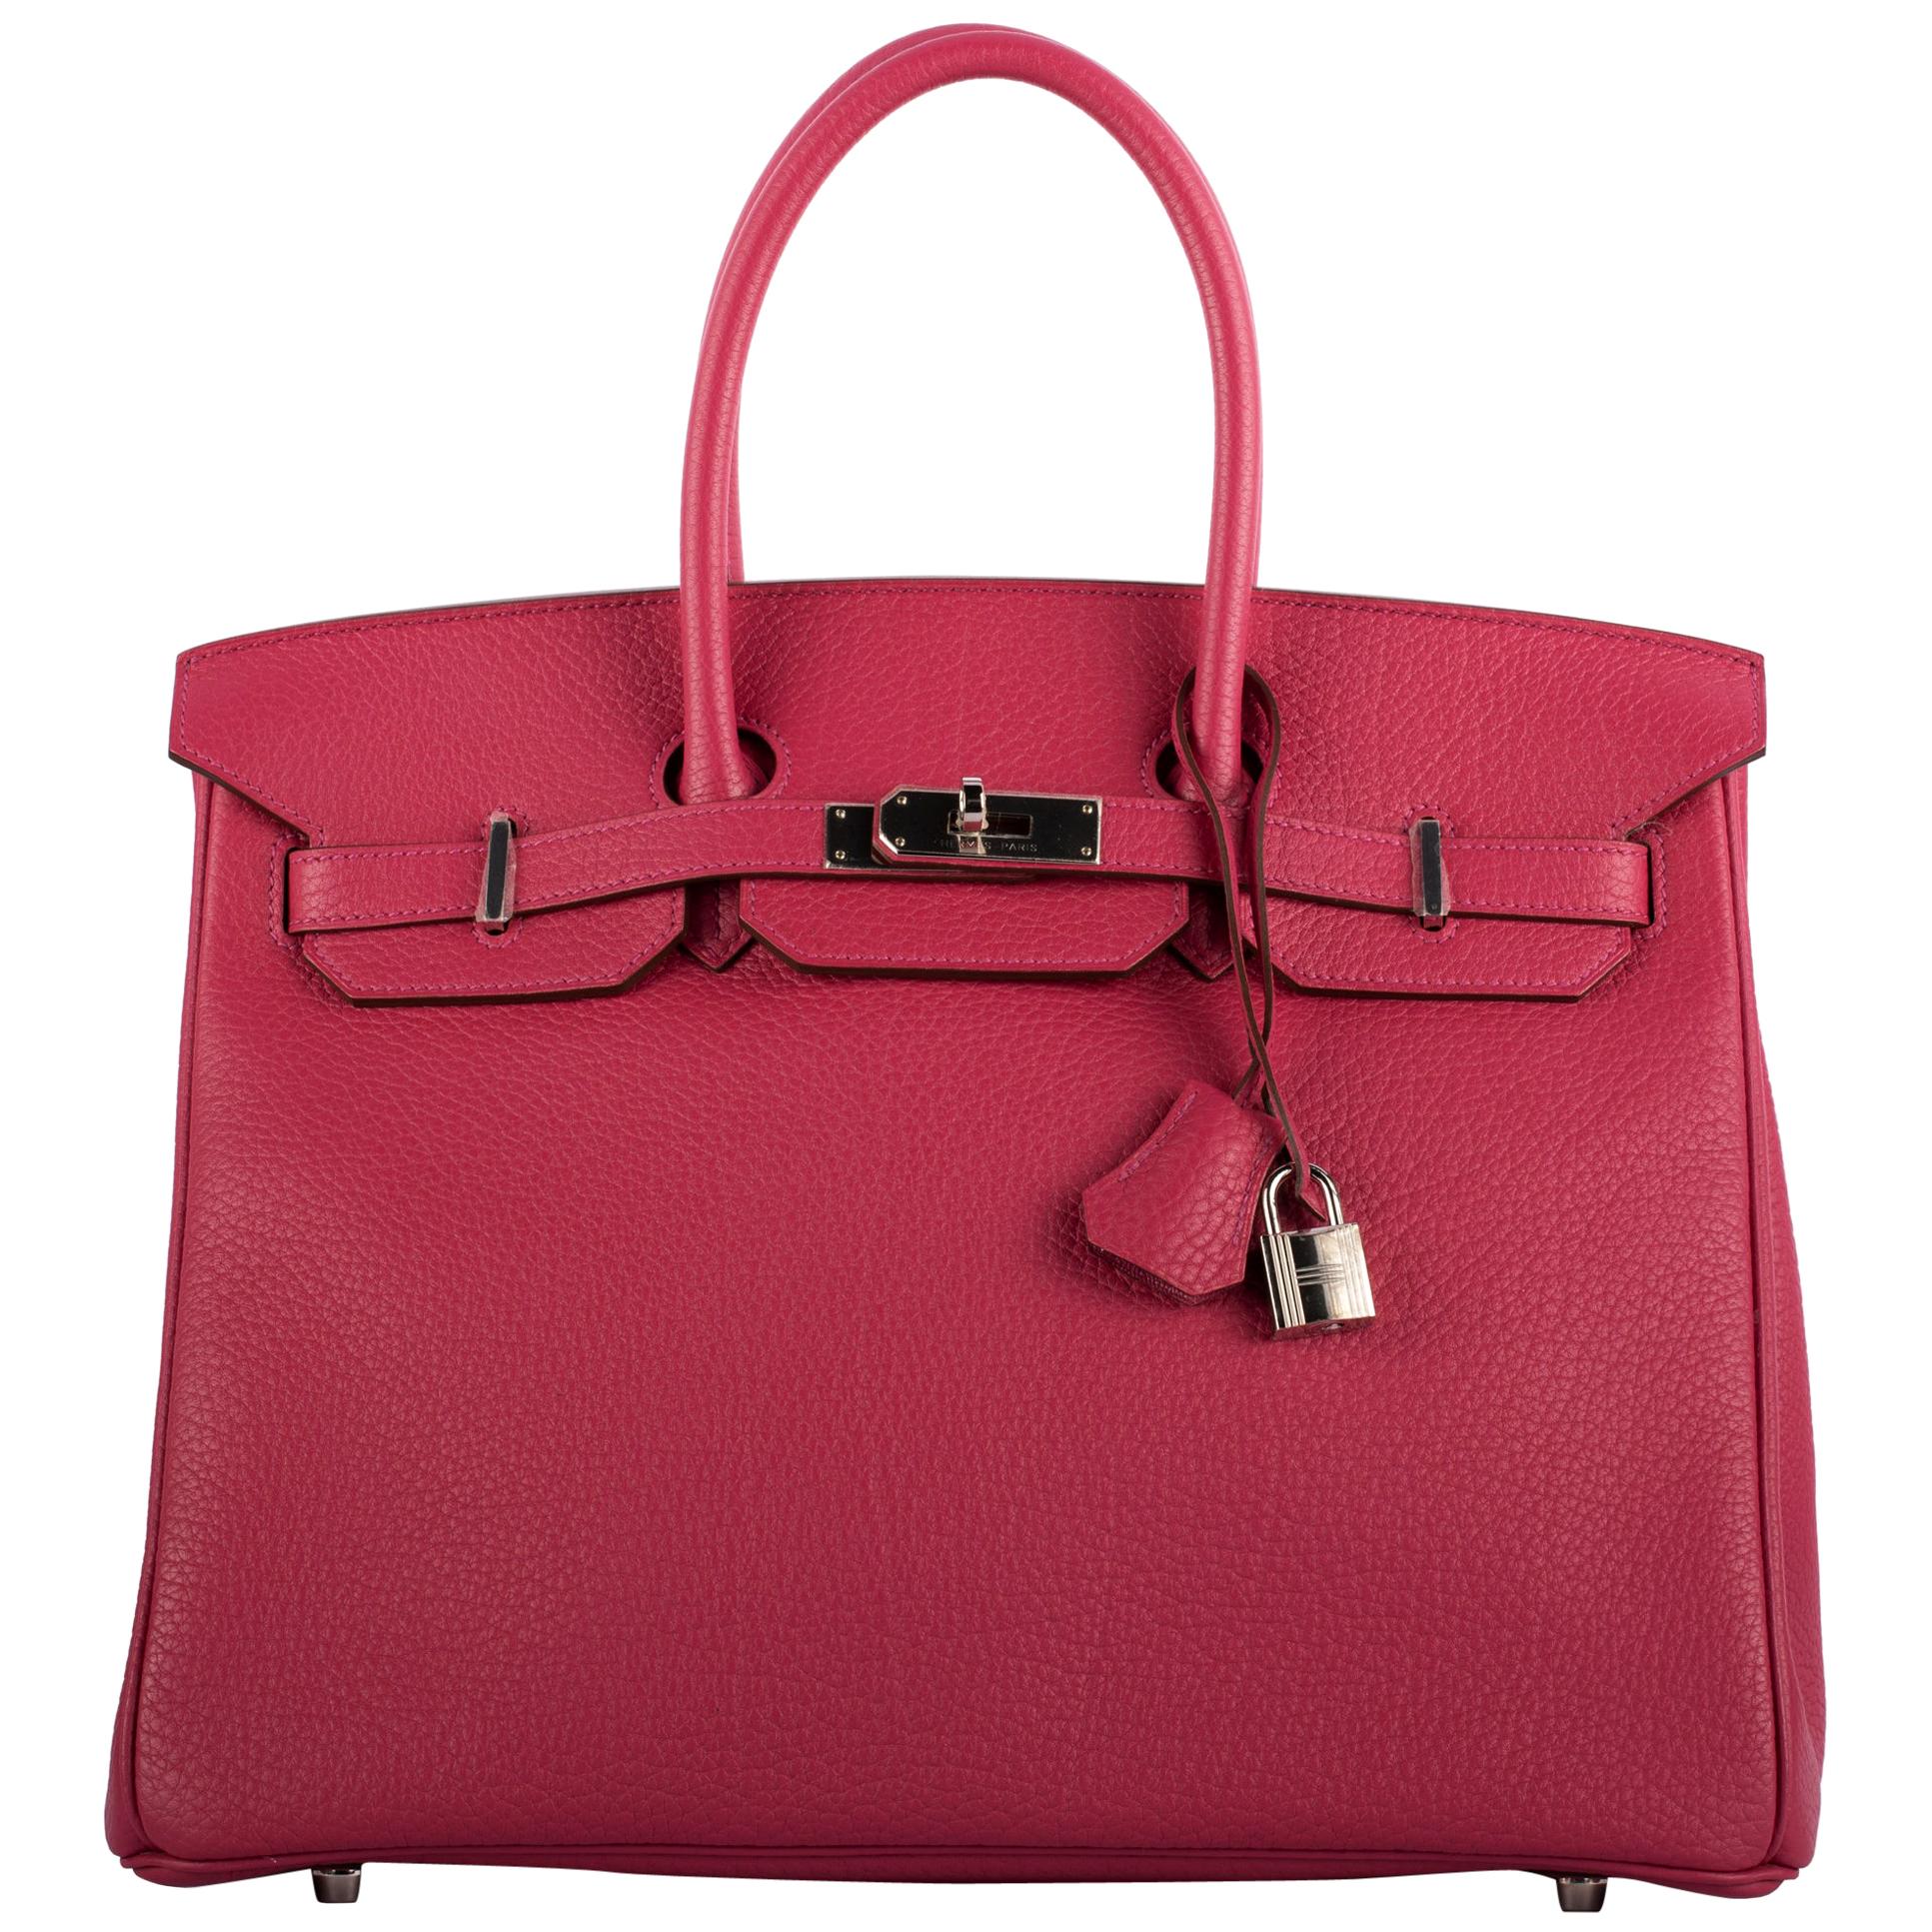 Red Hermes Bags - 1048 For Sale on 1stDibs